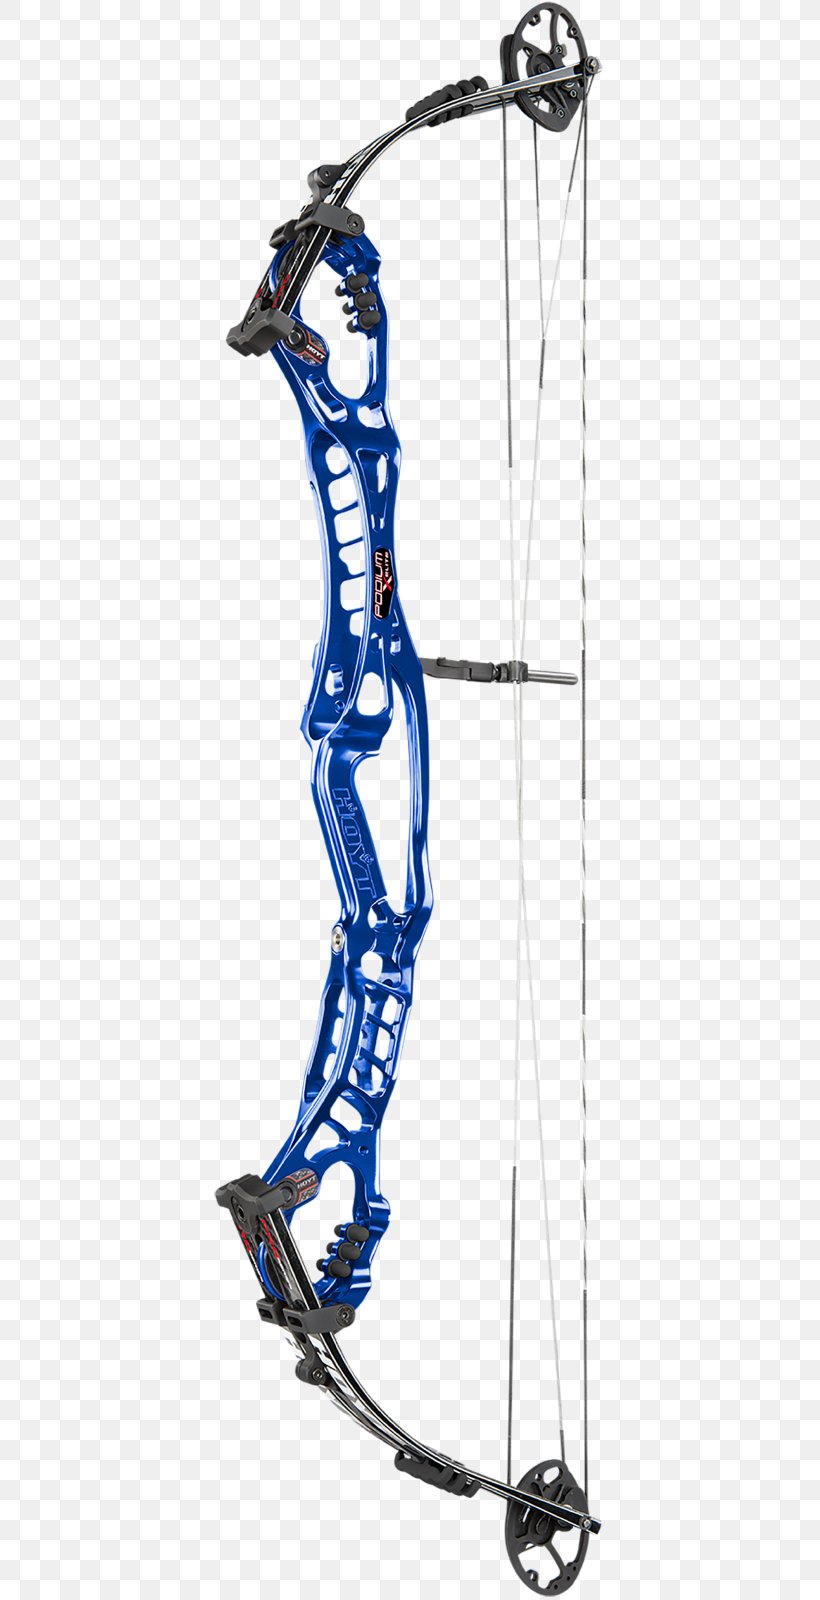 Archery Compound Bows Bow And Arrow Recurve Bow Bowhunting, PNG, 413x1600px, Archery, Advanced Archery, Bow And Arrow, Bowhunting, Cam Download Free